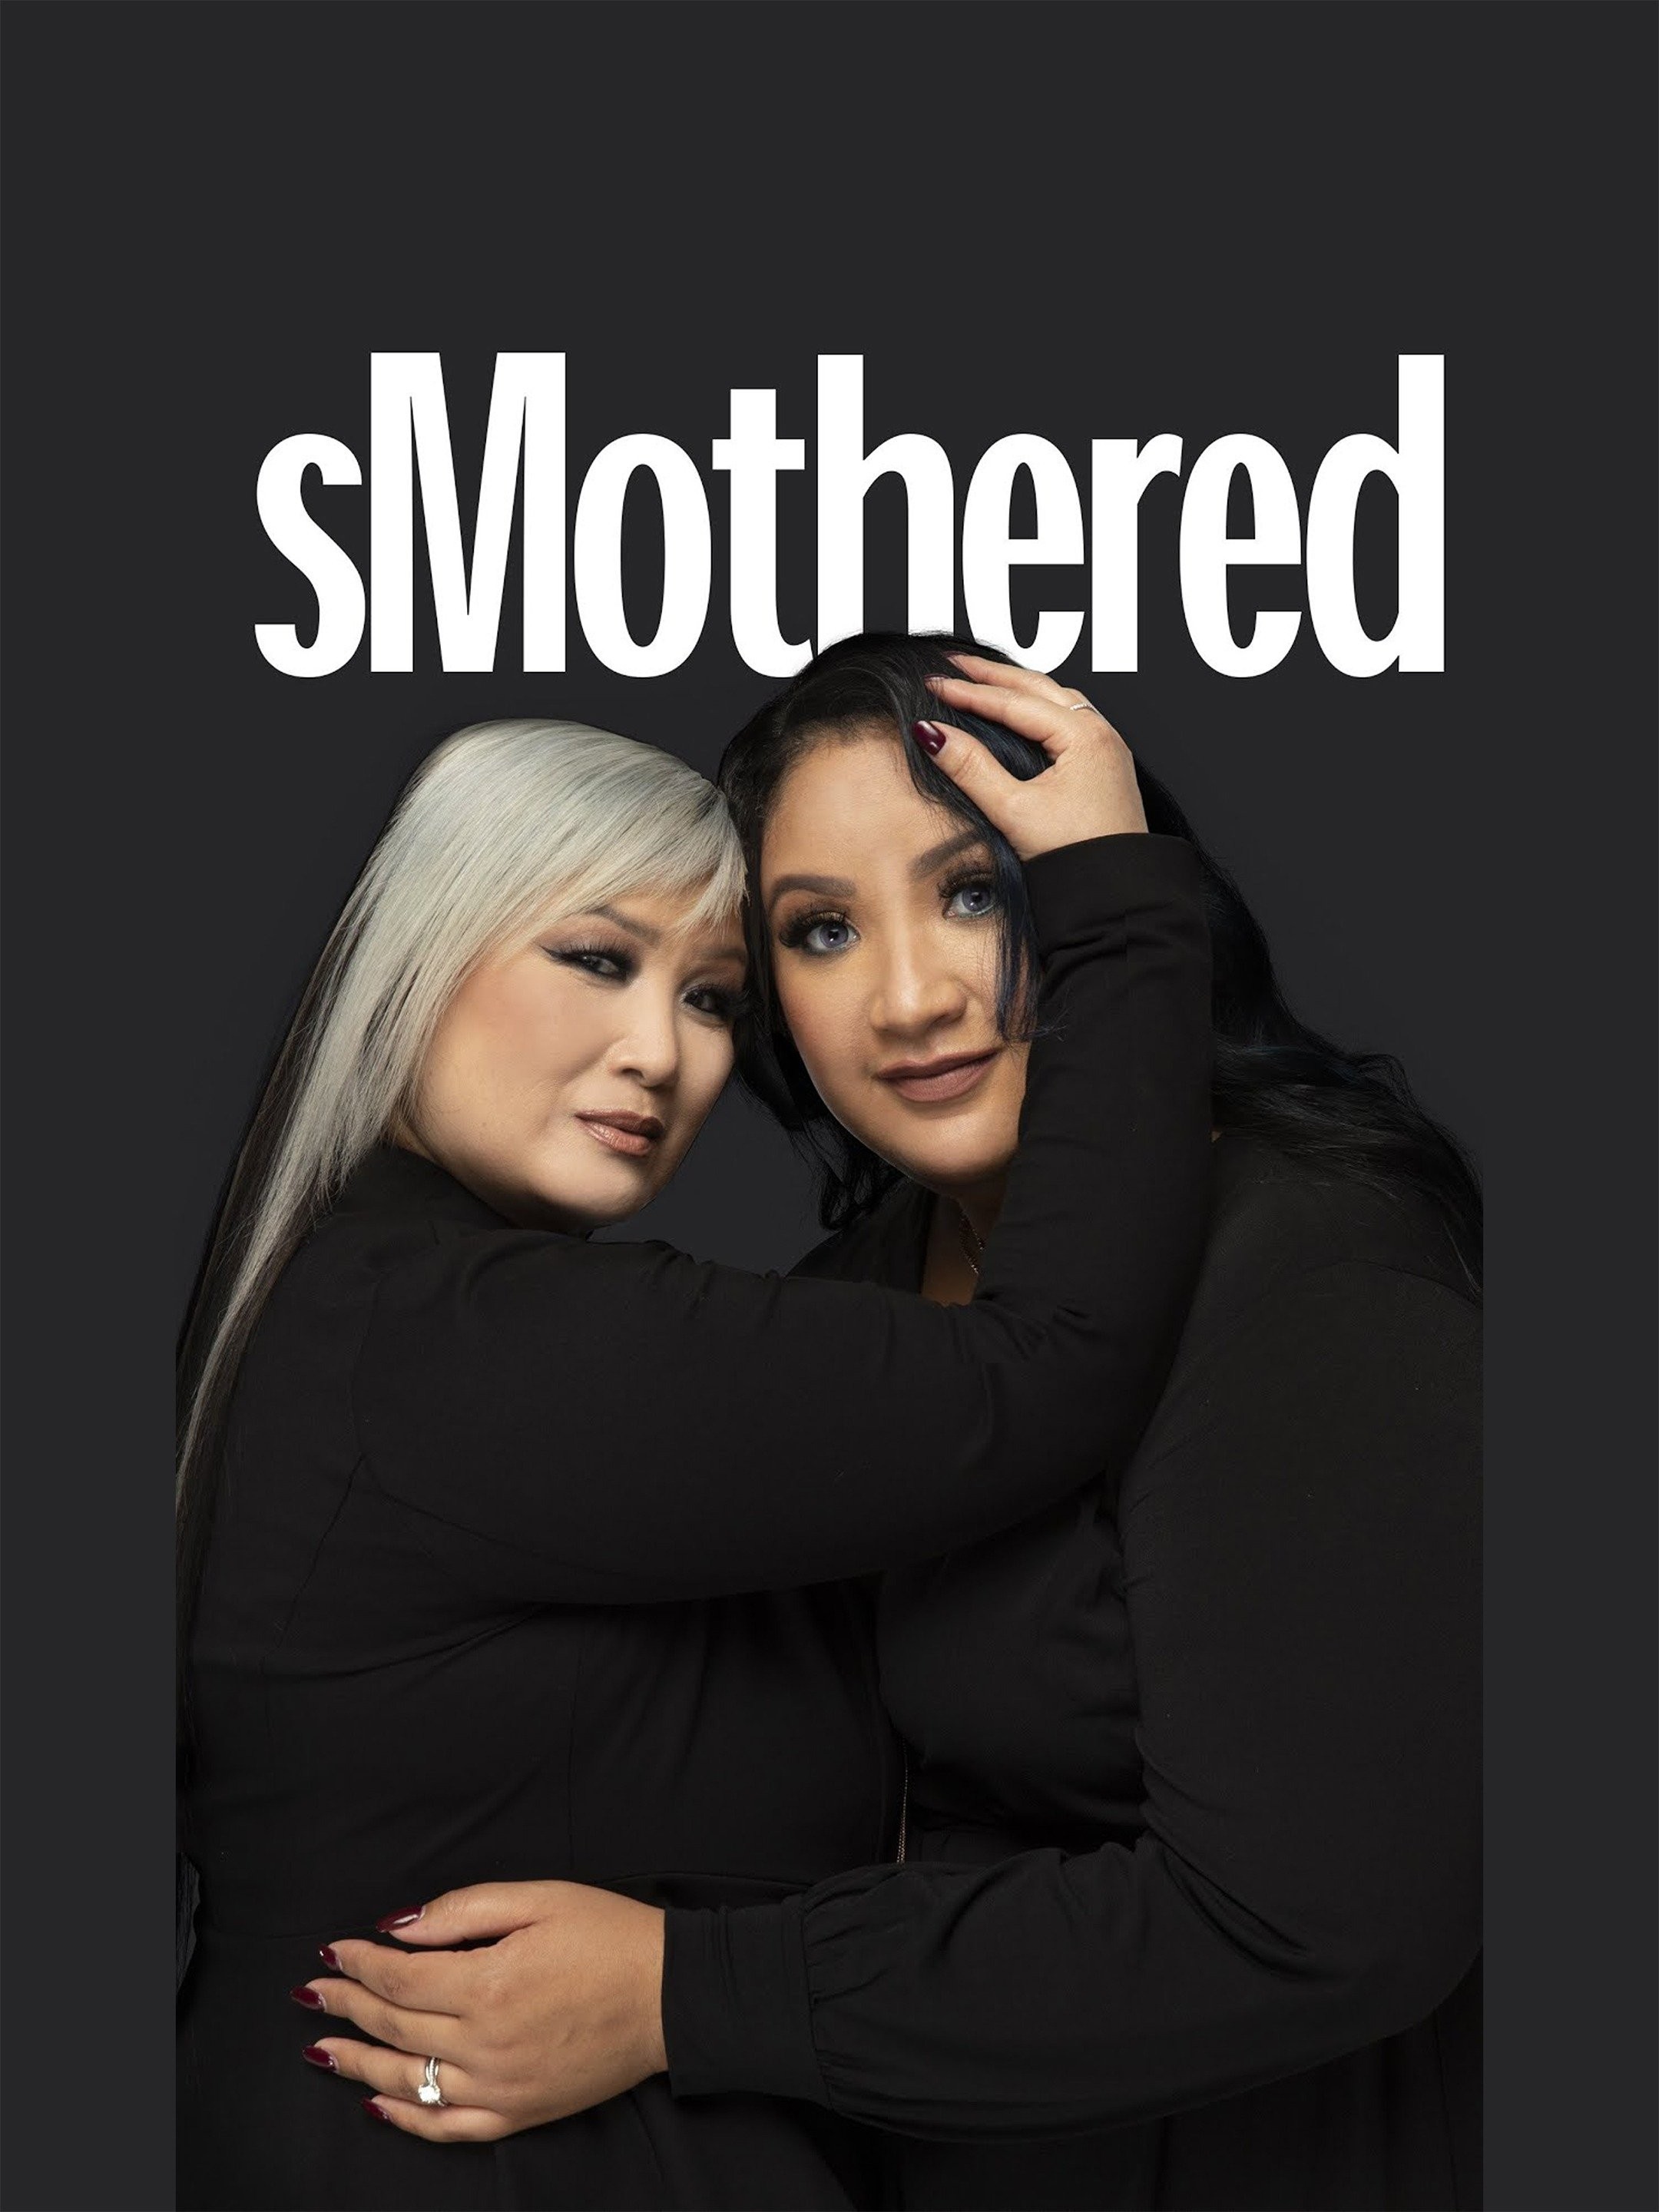 sMothered' Season 3: Meet the New and Returning Cast